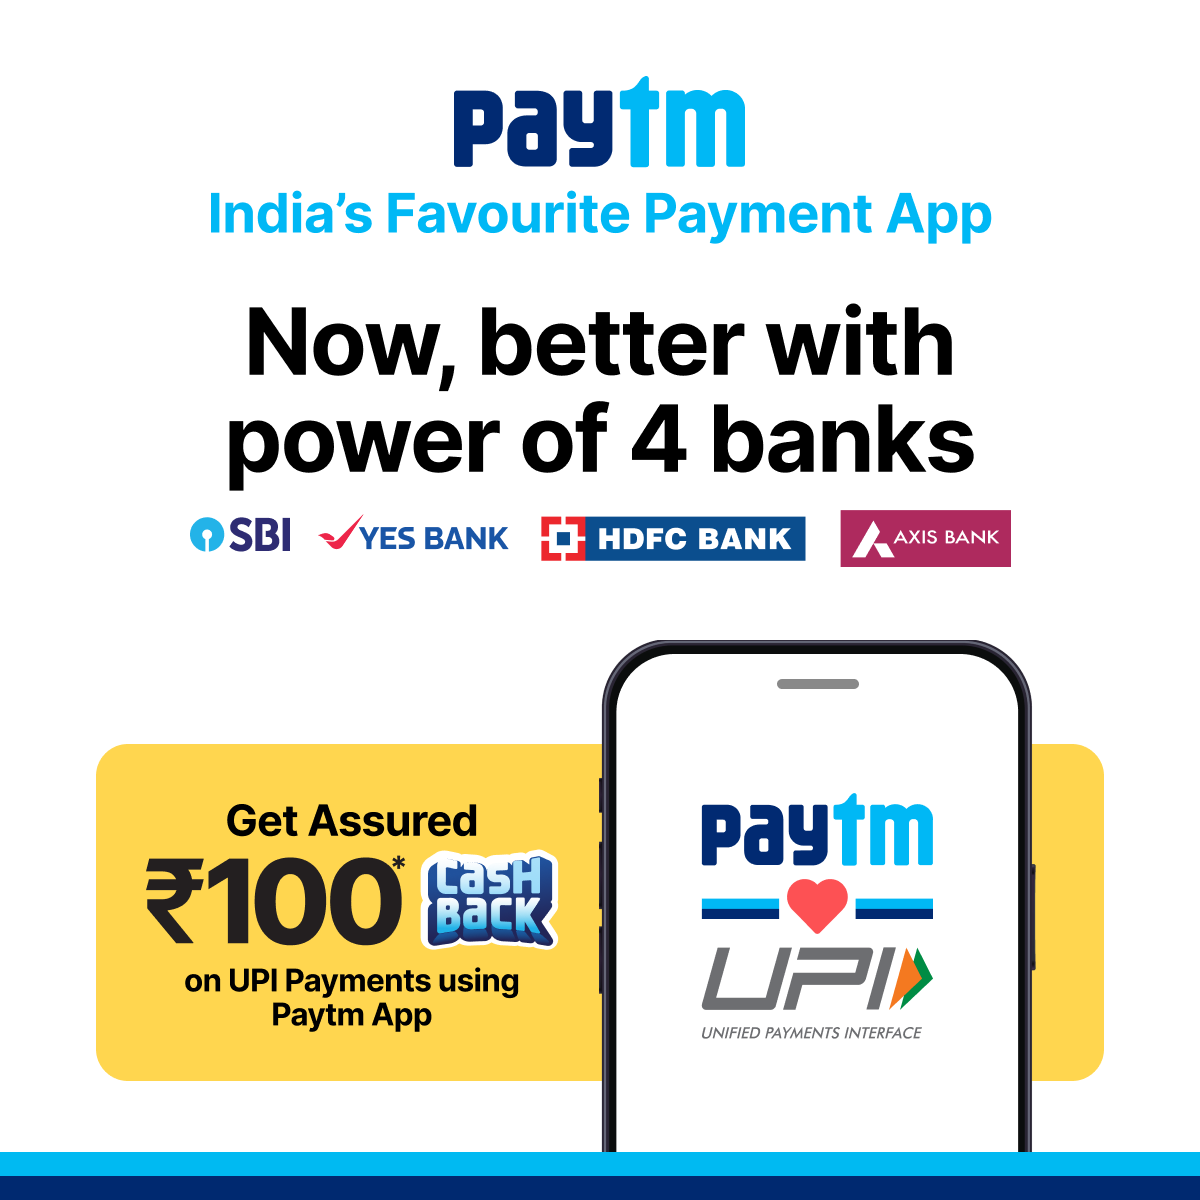 #Paytm is India’s favourite payment app! 🚀 Now, better with power of 4 banks   

Get assured Rs 100 cashback on UPI payments using Paytm app: p.paytm.me/xCTH/zgd9m7vf 

#PaytmKaro @YESBANK @AxisBank @HDFC_Bank @TheOfficialSBI